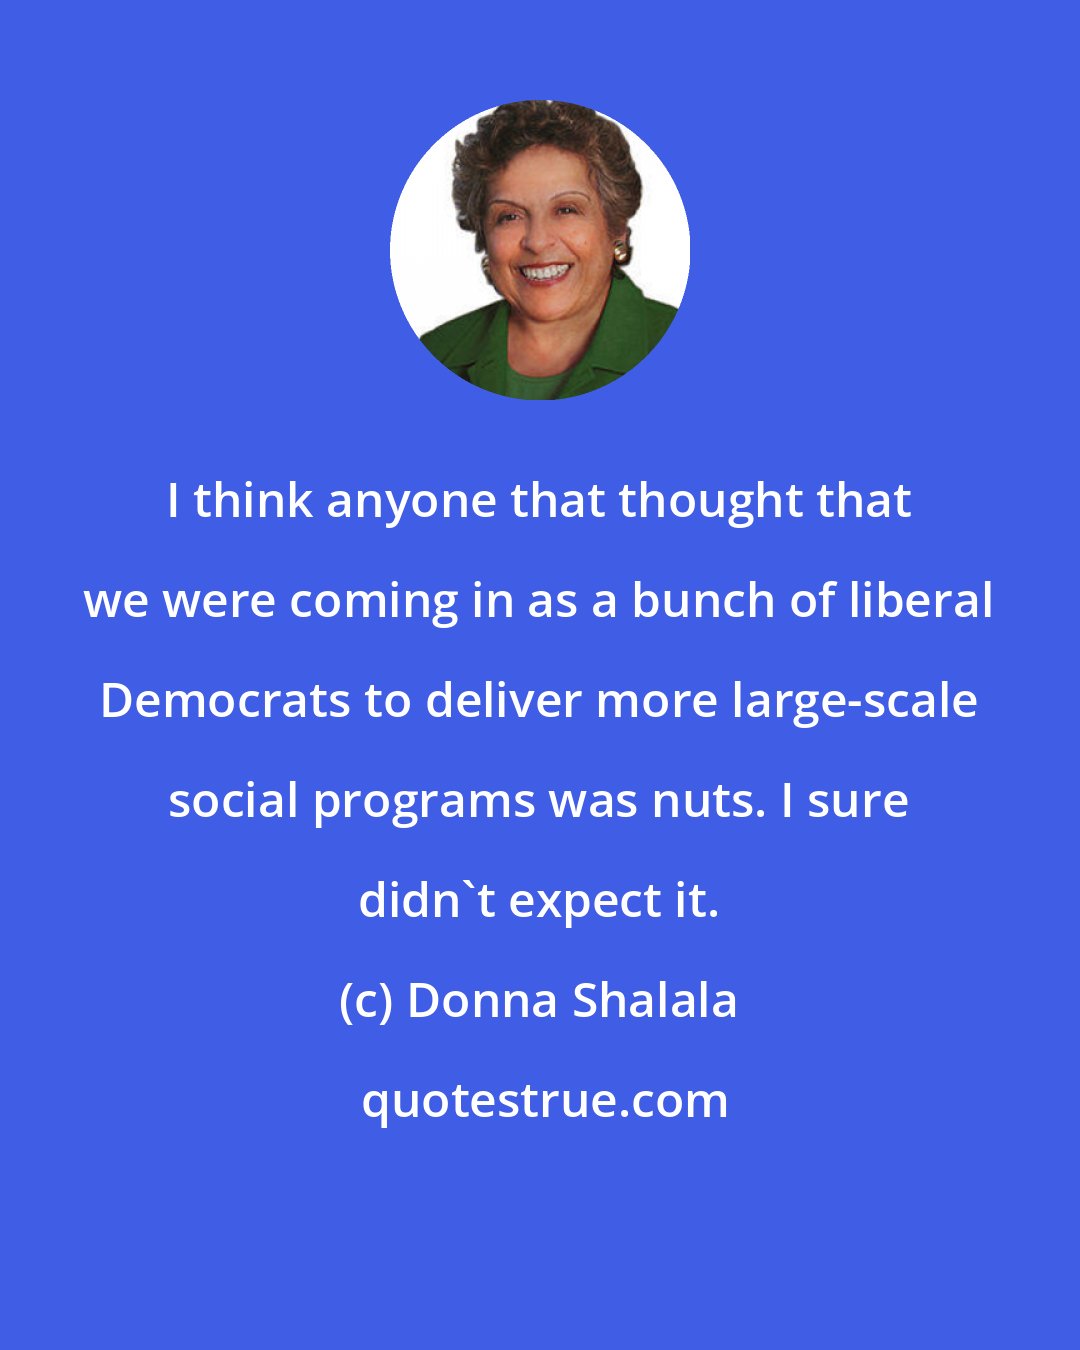 Donna Shalala: I think anyone that thought that we were coming in as a bunch of liberal Democrats to deliver more large-scale social programs was nuts. I sure didn't expect it.